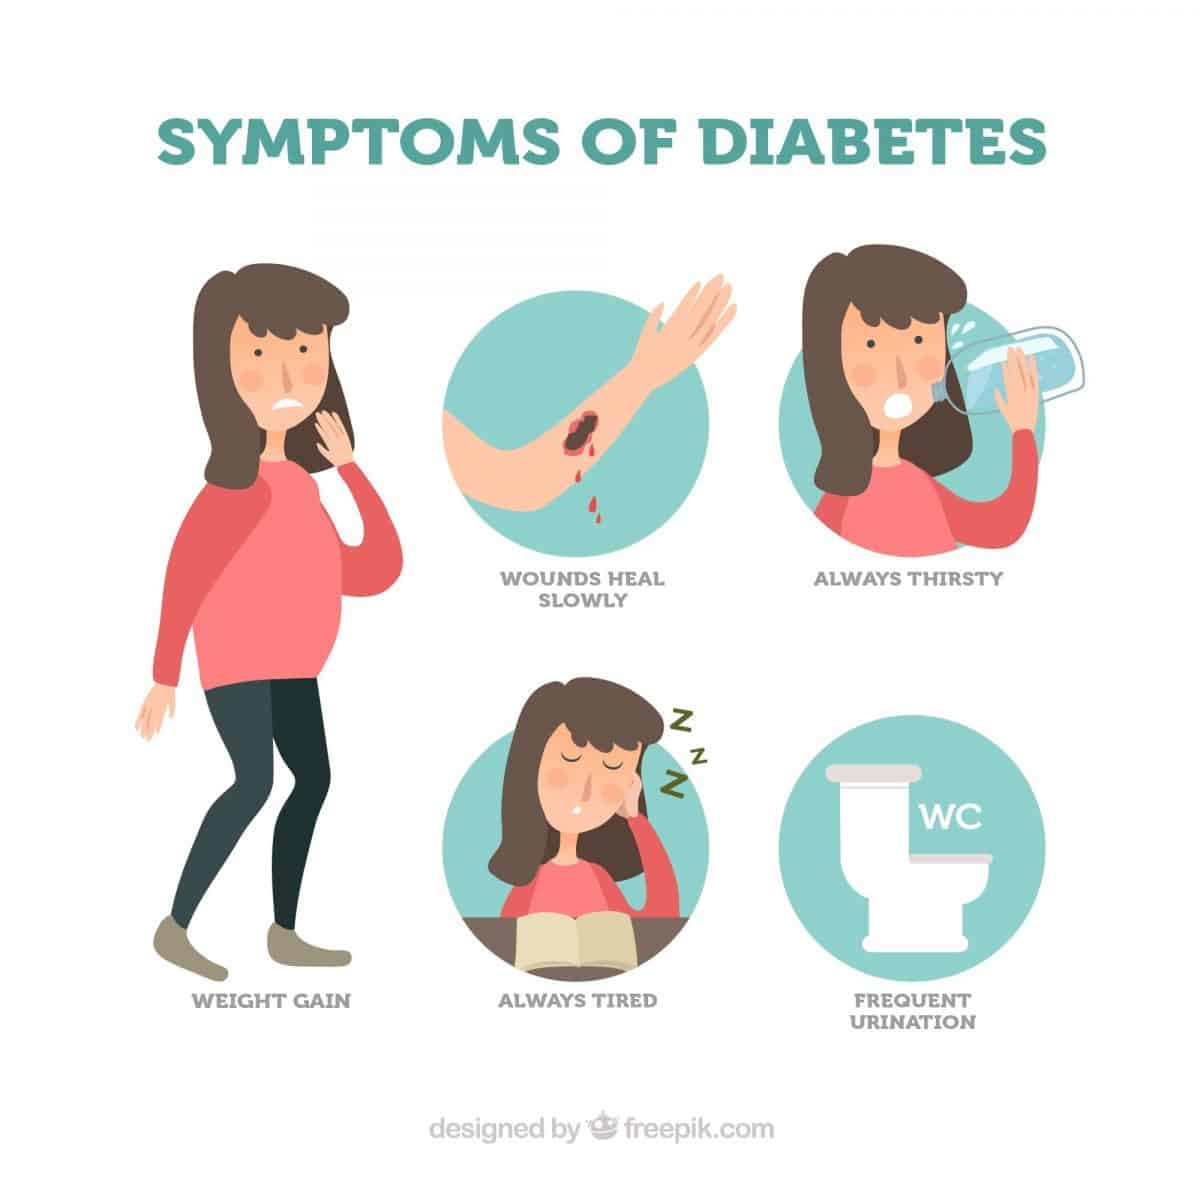 Look out for these early symptoms of diabetes